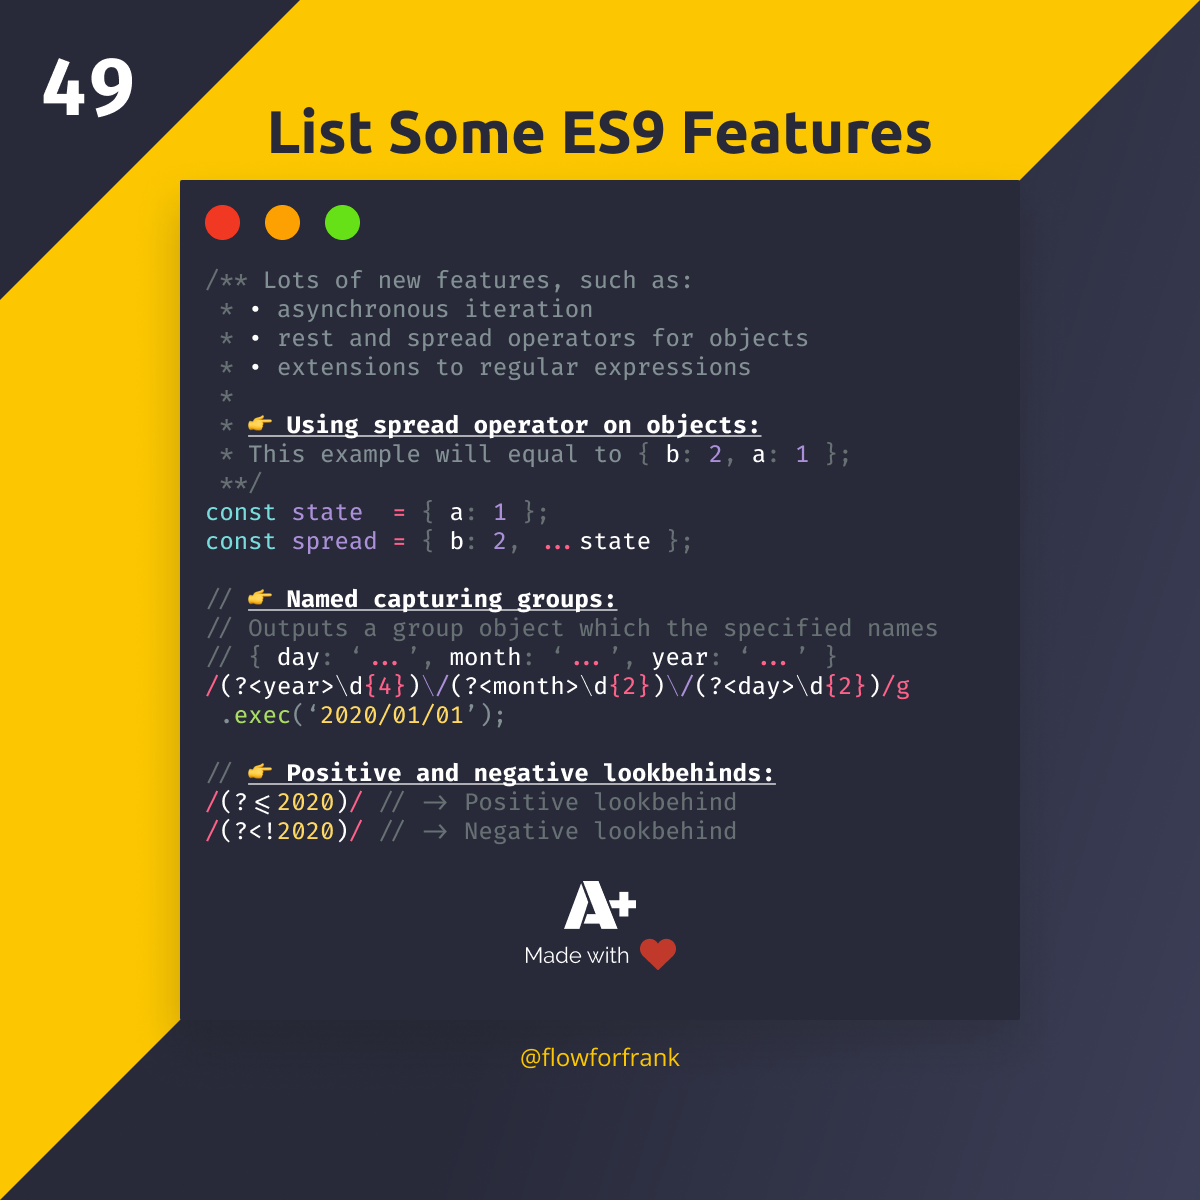 What are Some ES9 Features?